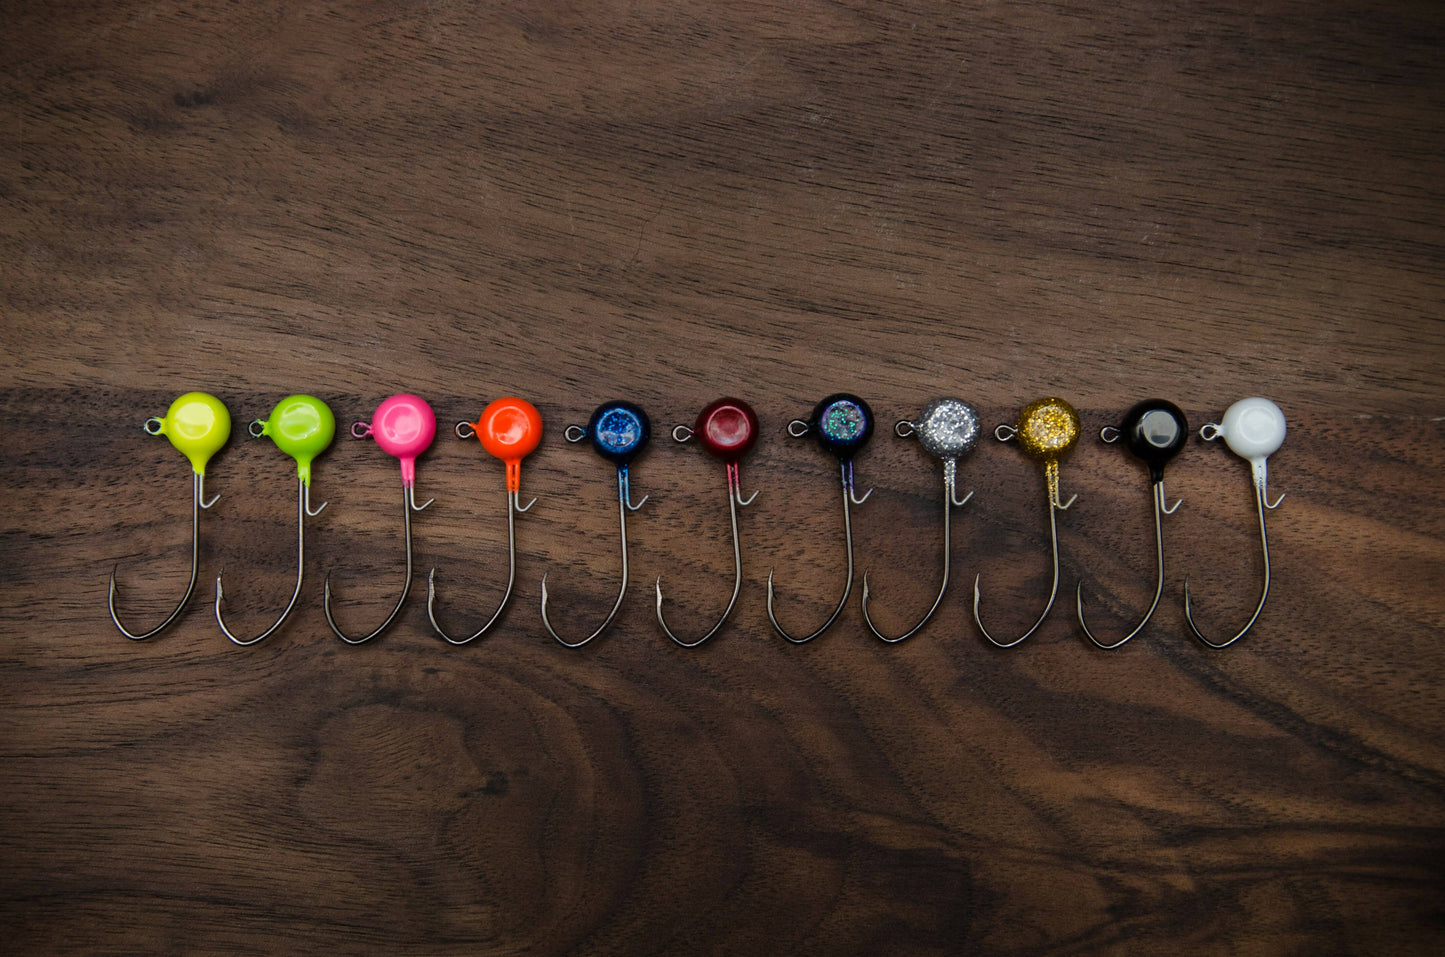 Rally Time Jigs-Freestyle Sickle-1/16 Oz-5 Pack-2 Hook Sizes-11 Colors!